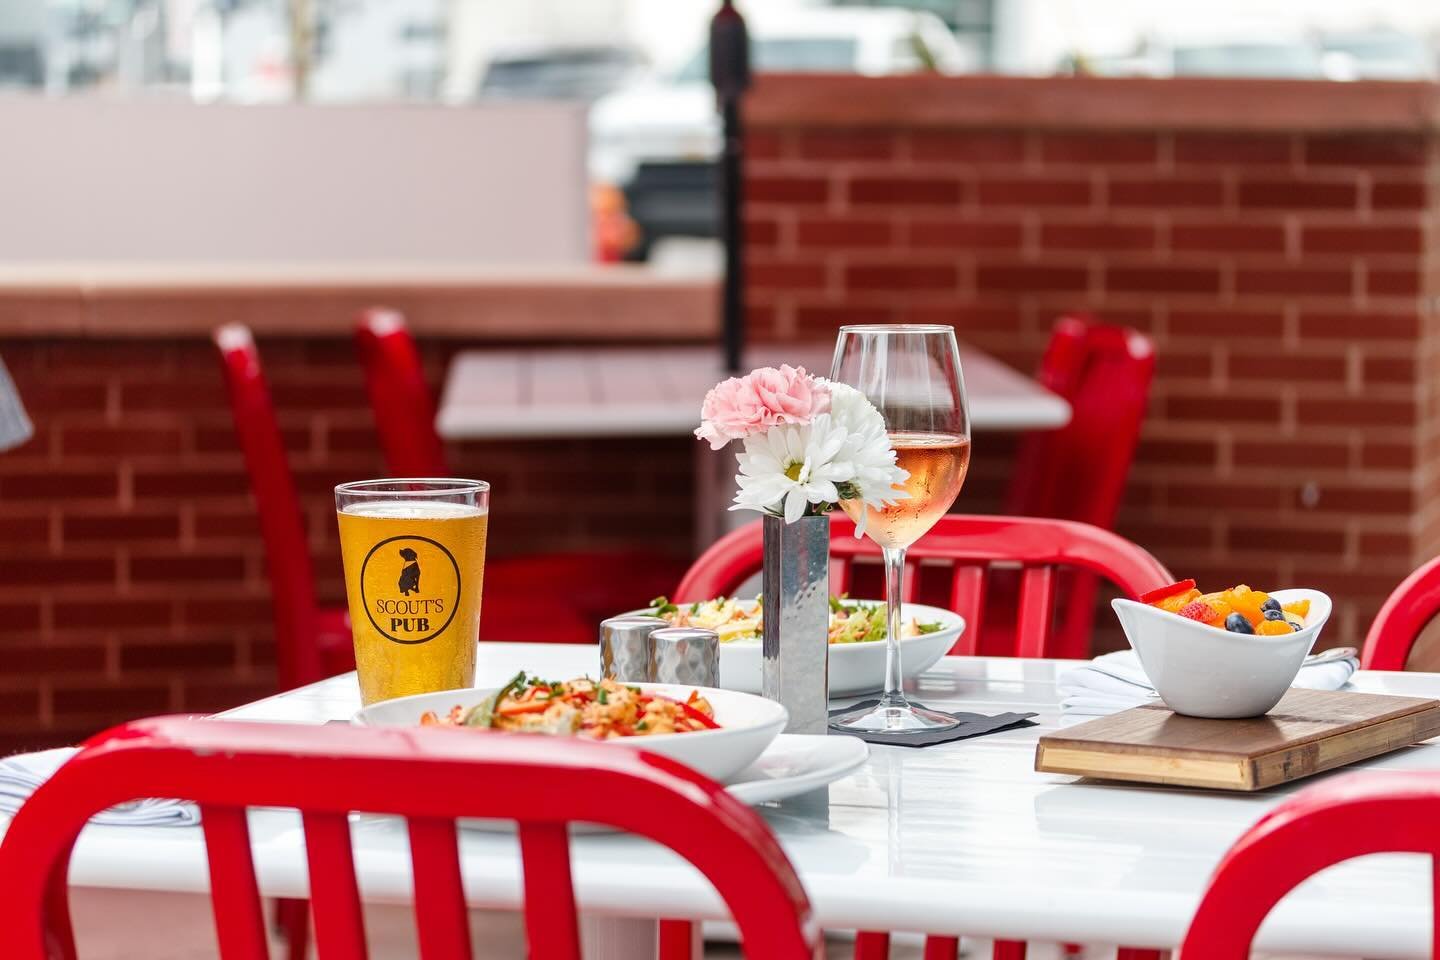 Spring has sprung, and you know what that means &ndash; it's patio season at Scout's Pub! 🌸☀️ Embrace the sunshine, cold drinks, and delicious bites as we welcome the new season together. See you on the patio! ⁣
⁣⁣
⁣#springtime #patioseason #springh